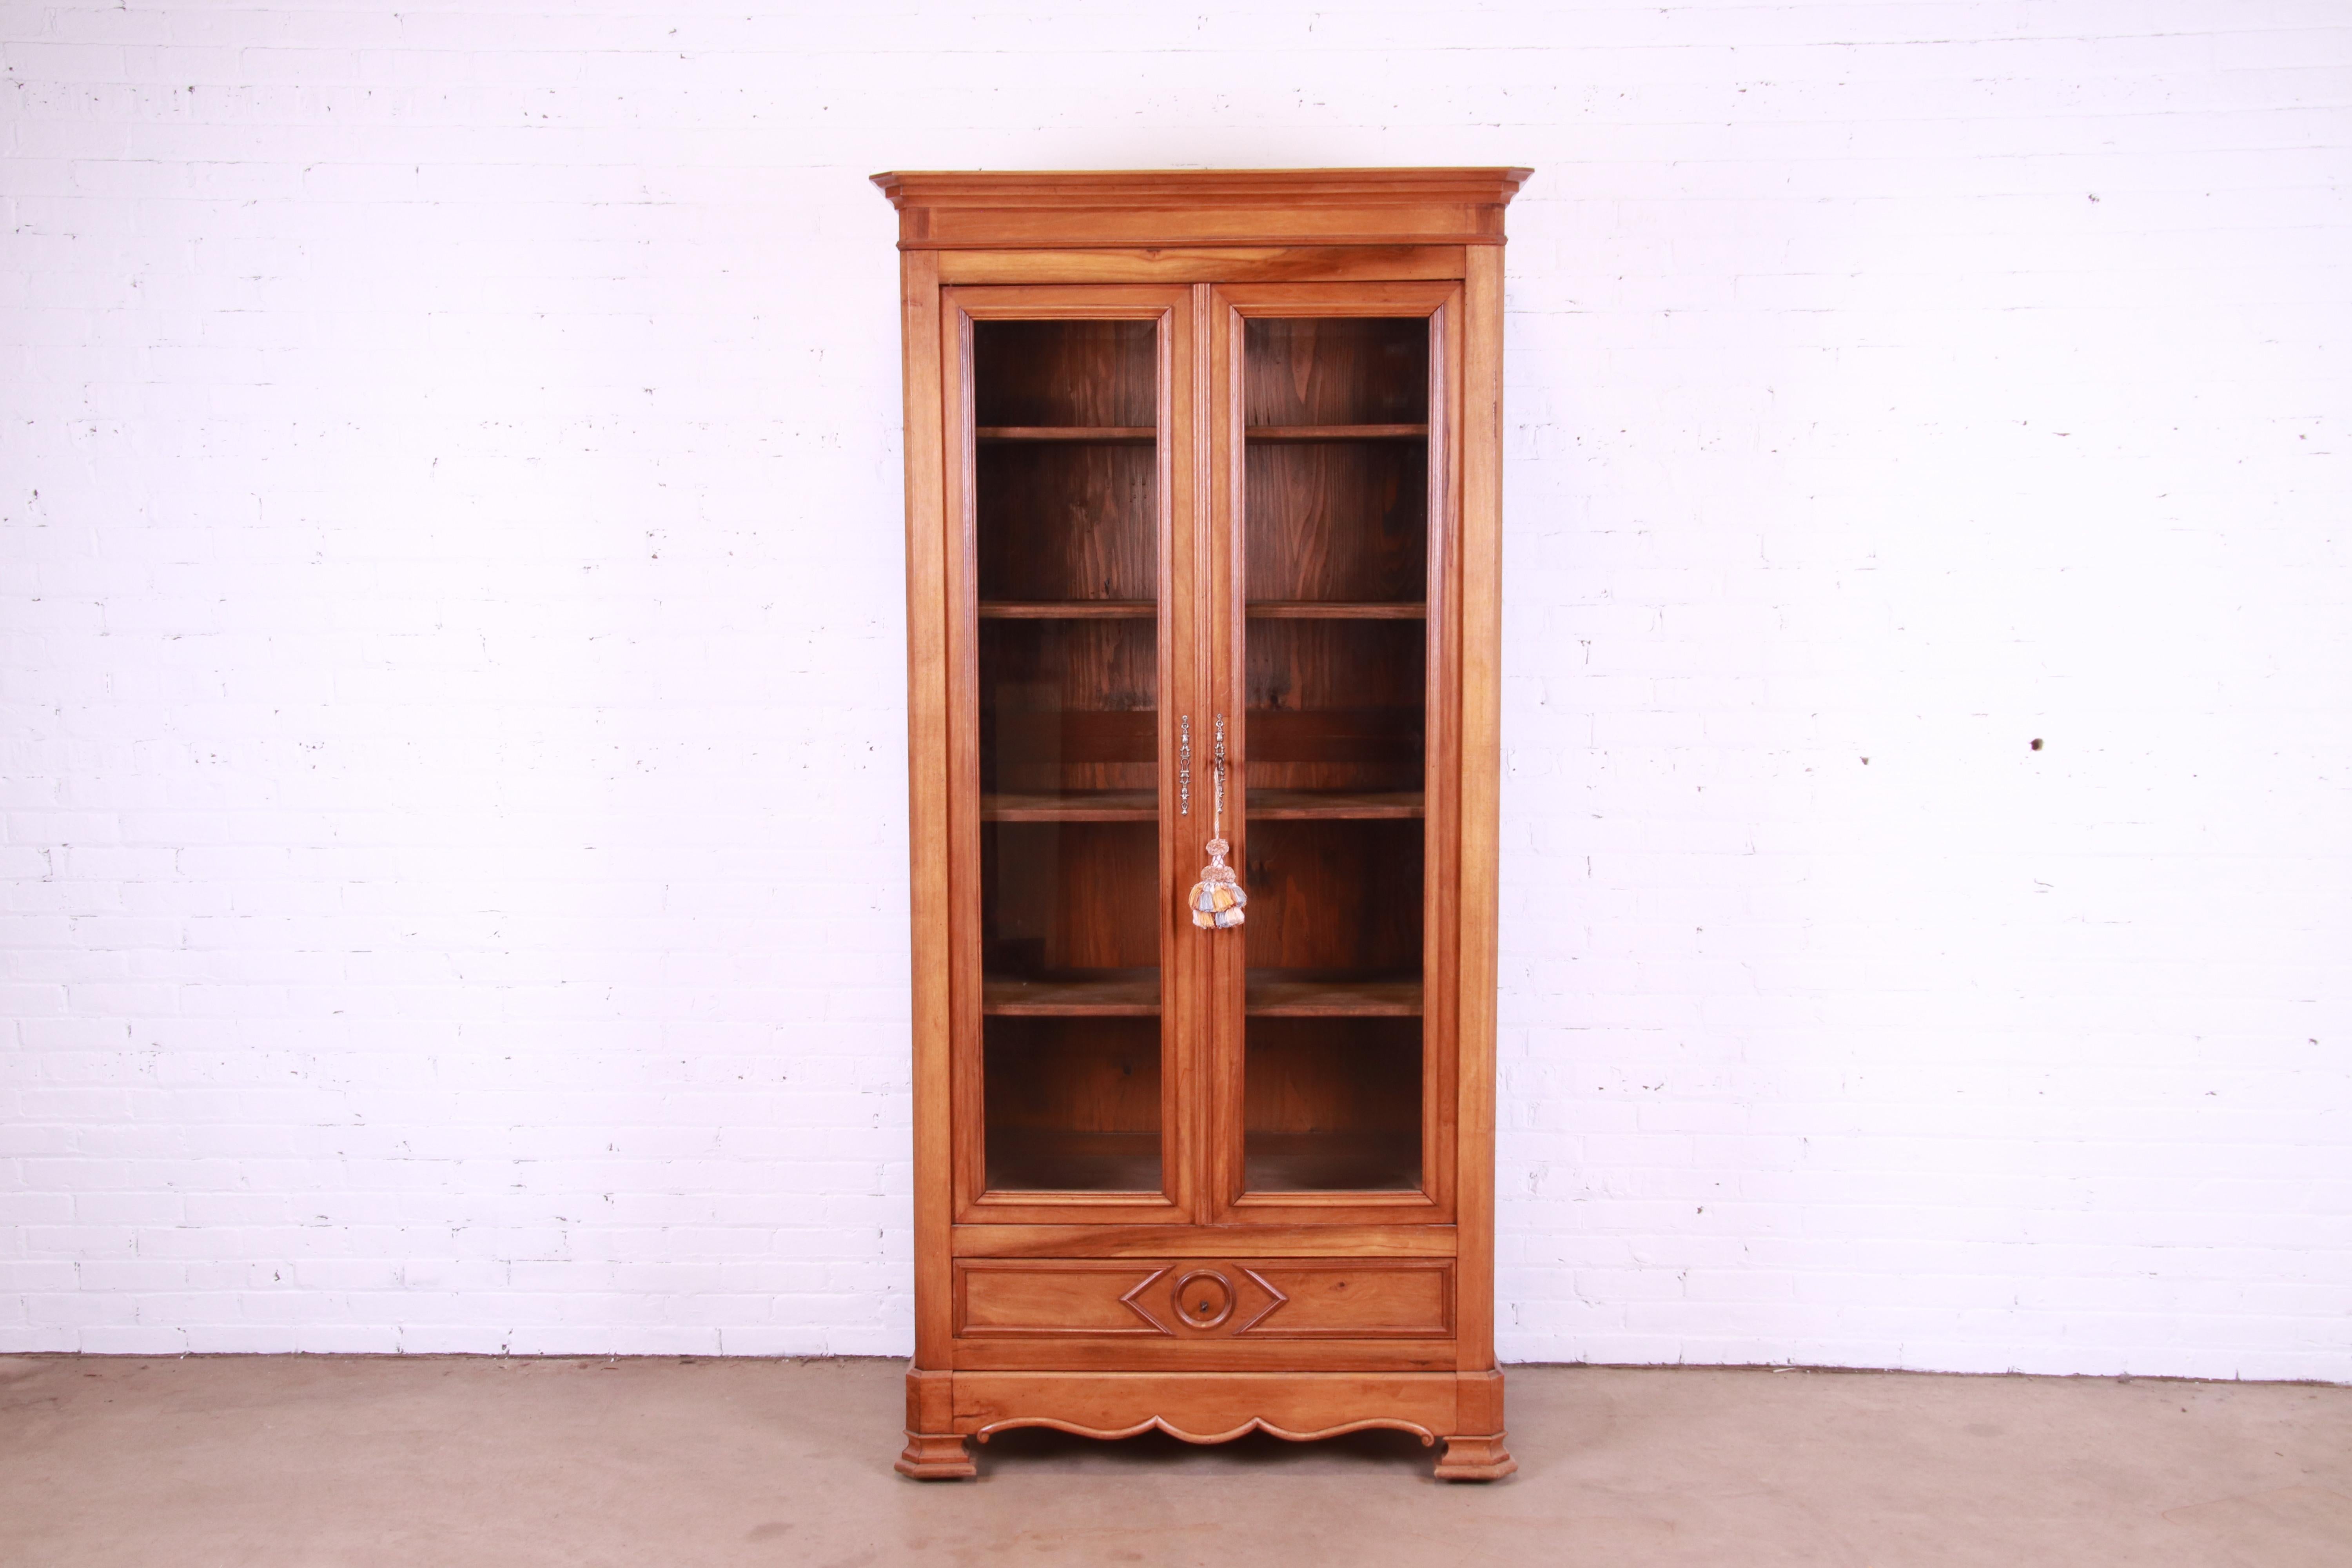 A gorgeous antique Victorian bookcase cabinet

USA, Circa 1890s

Carved solid walnut, with glass front doors and original brass hardware.

Measures: 43.5